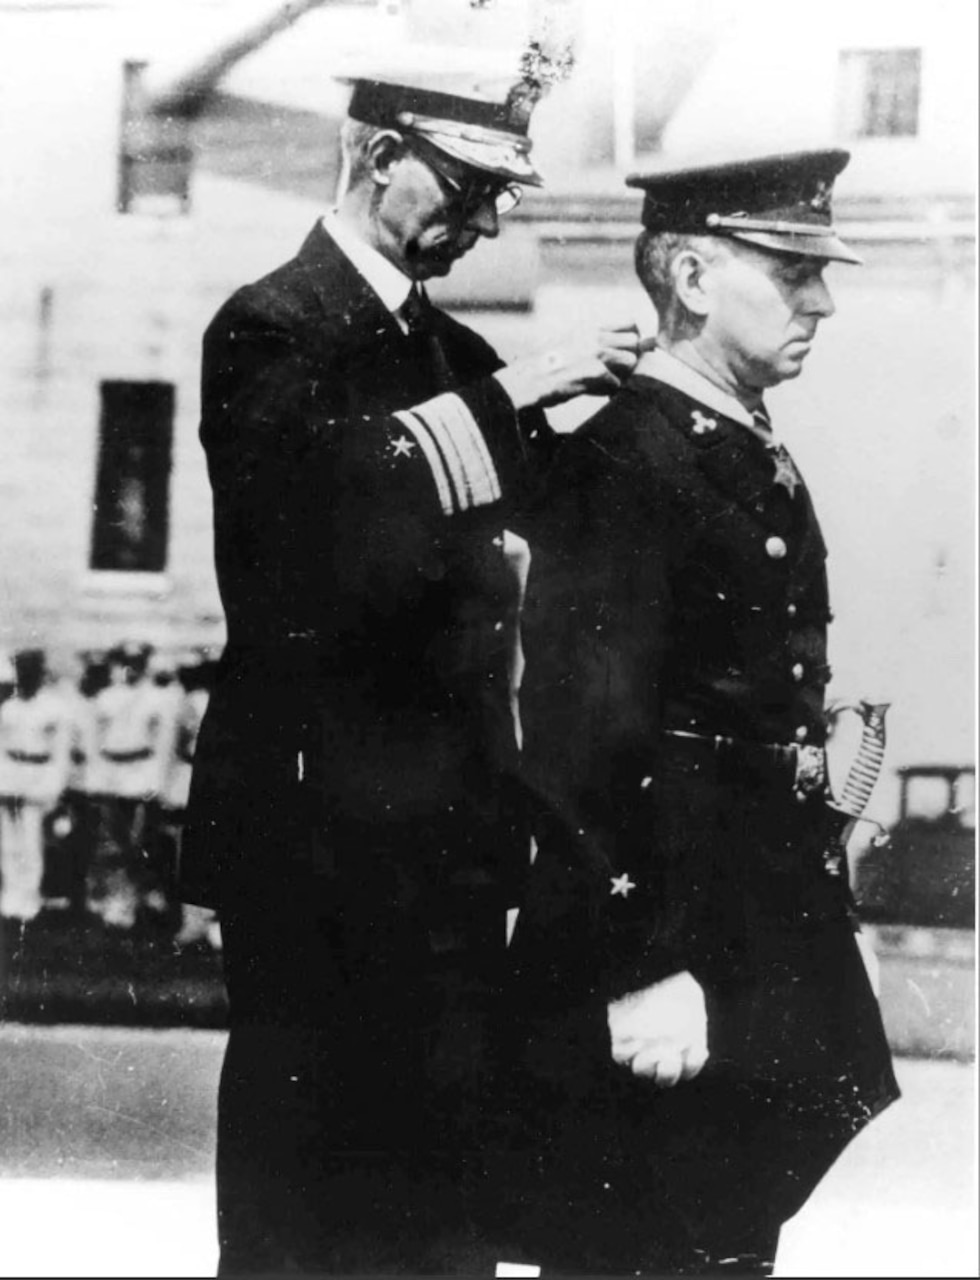 A man clasps a medal around another man’s neck.